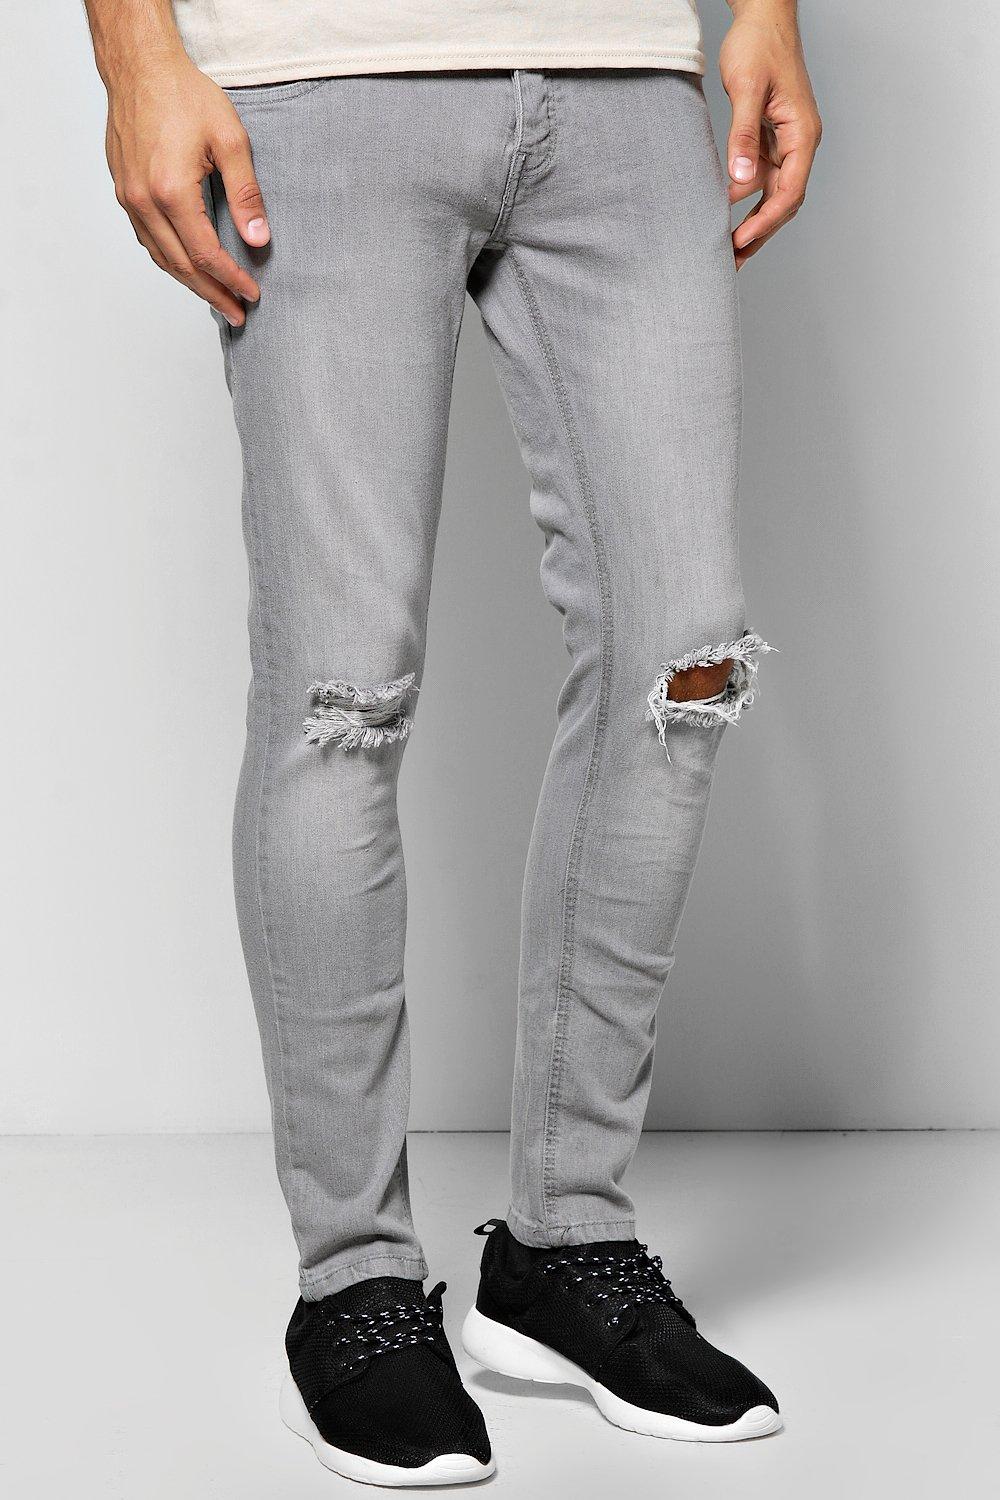 grey jeans distressed